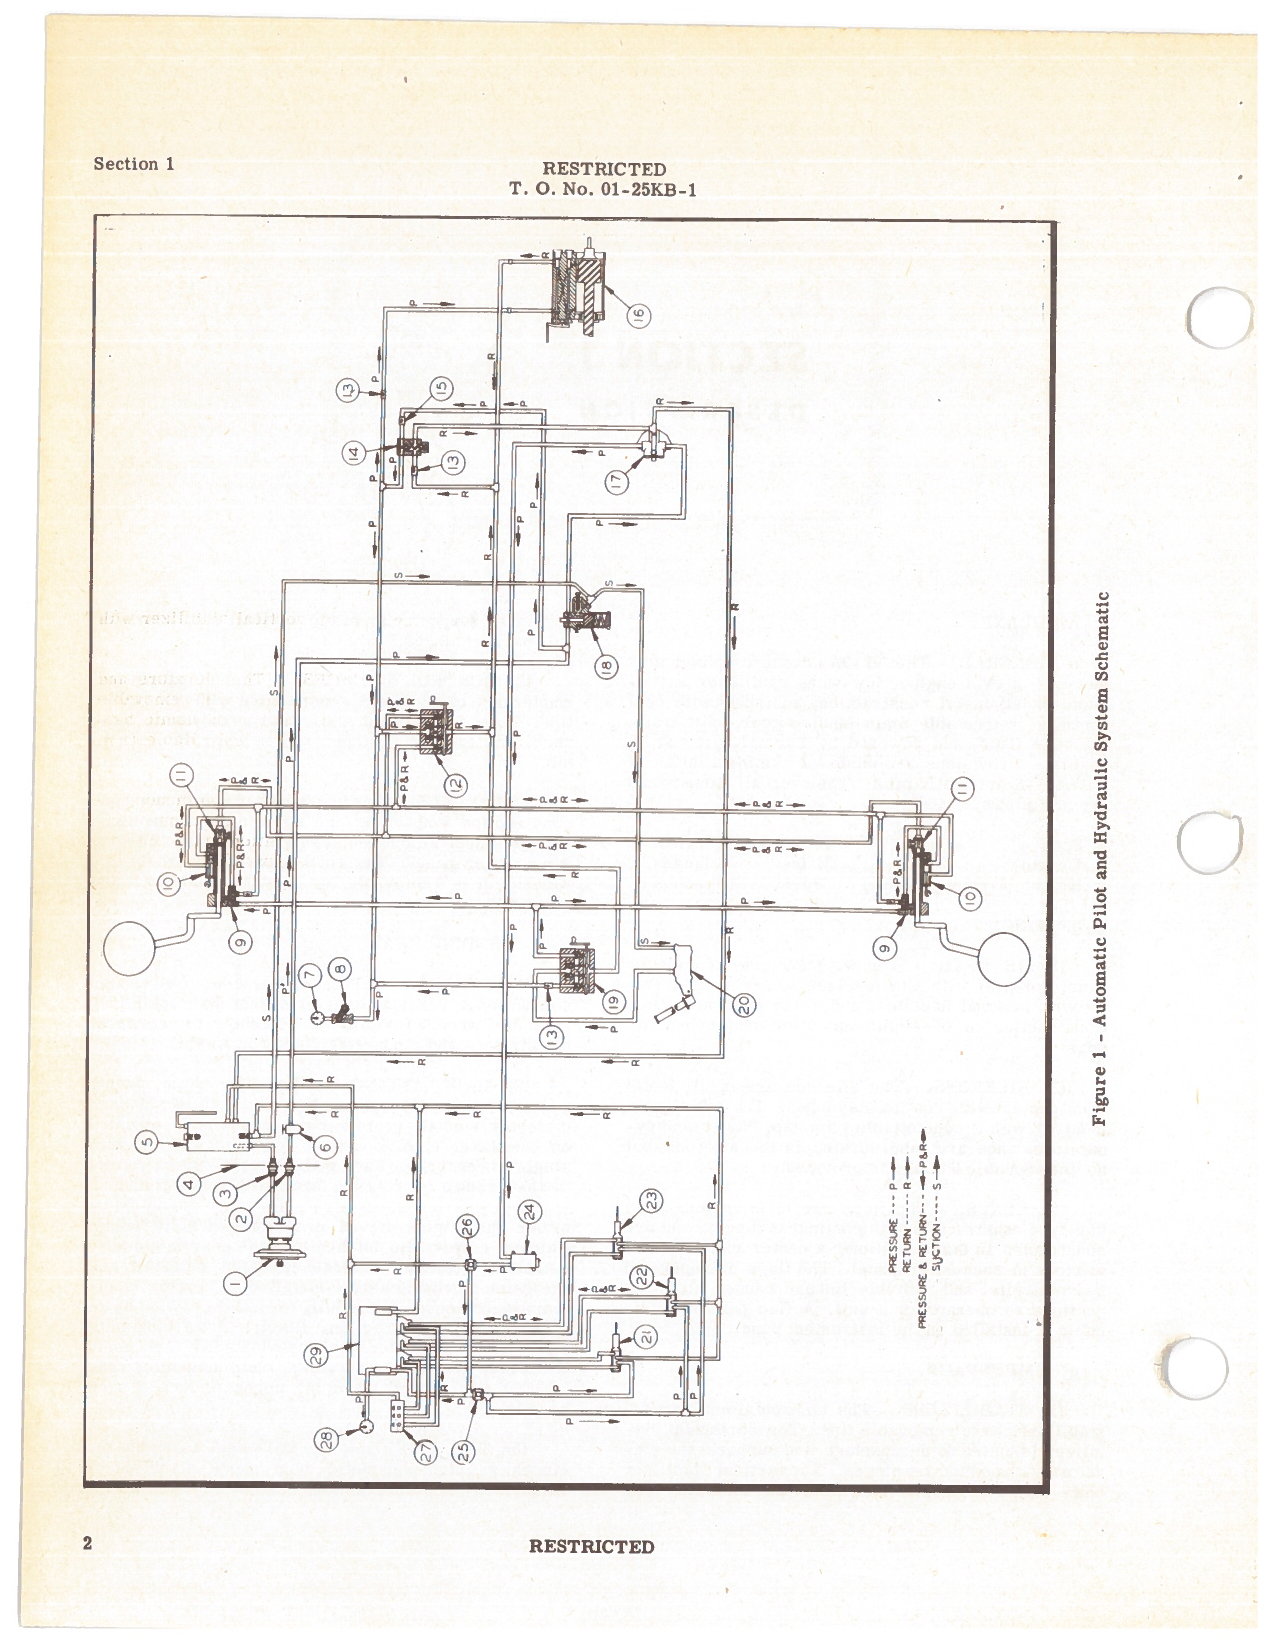 Sample page 8 from AirCorps Library document: Pilot's Flight Operating Instructions for Army Model AT-9A Airplane